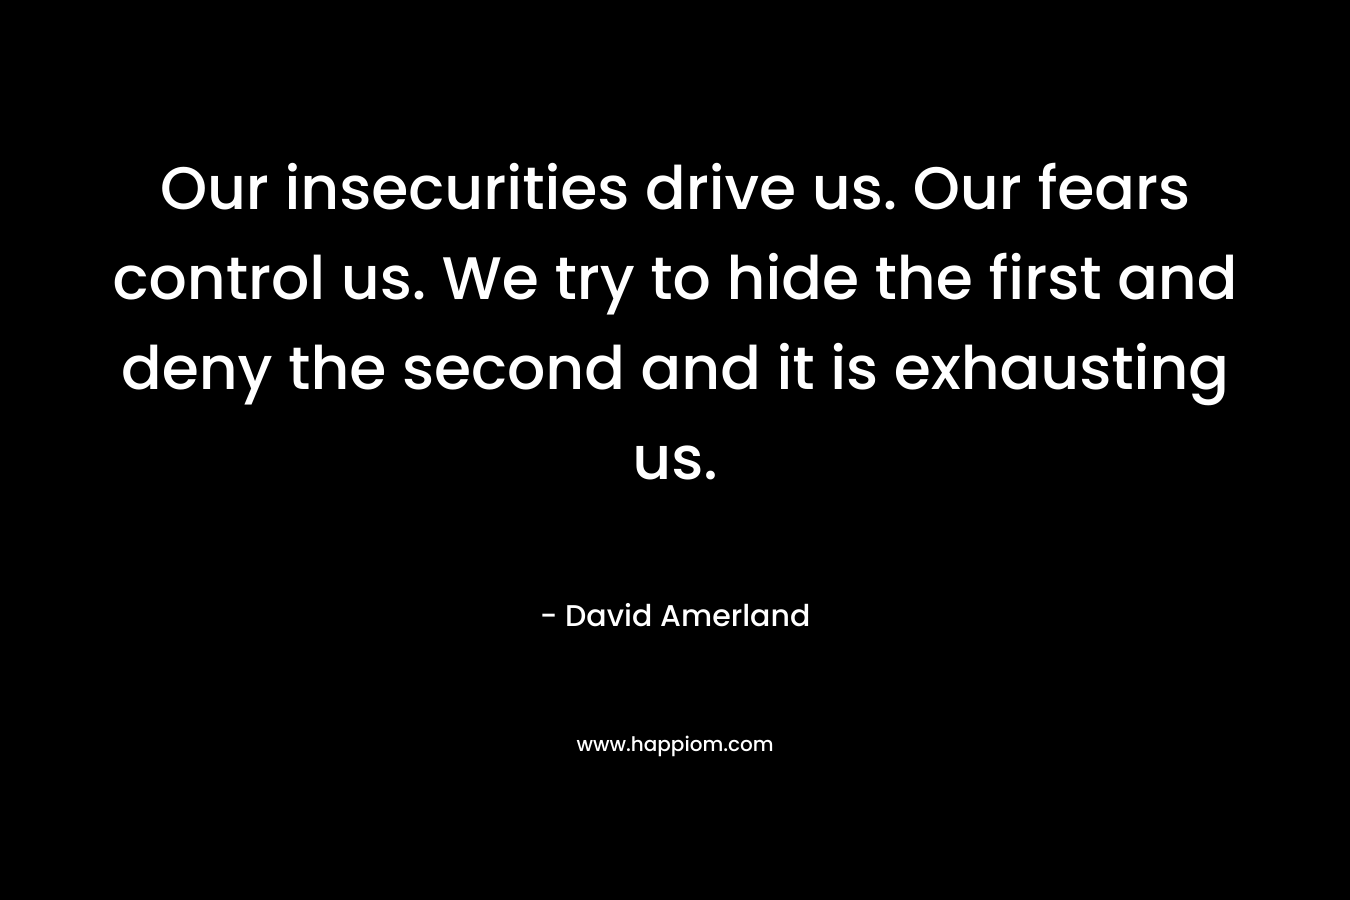 Our insecurities drive us. Our fears control us. We try to hide the first and deny the second and it is exhausting us. – David Amerland